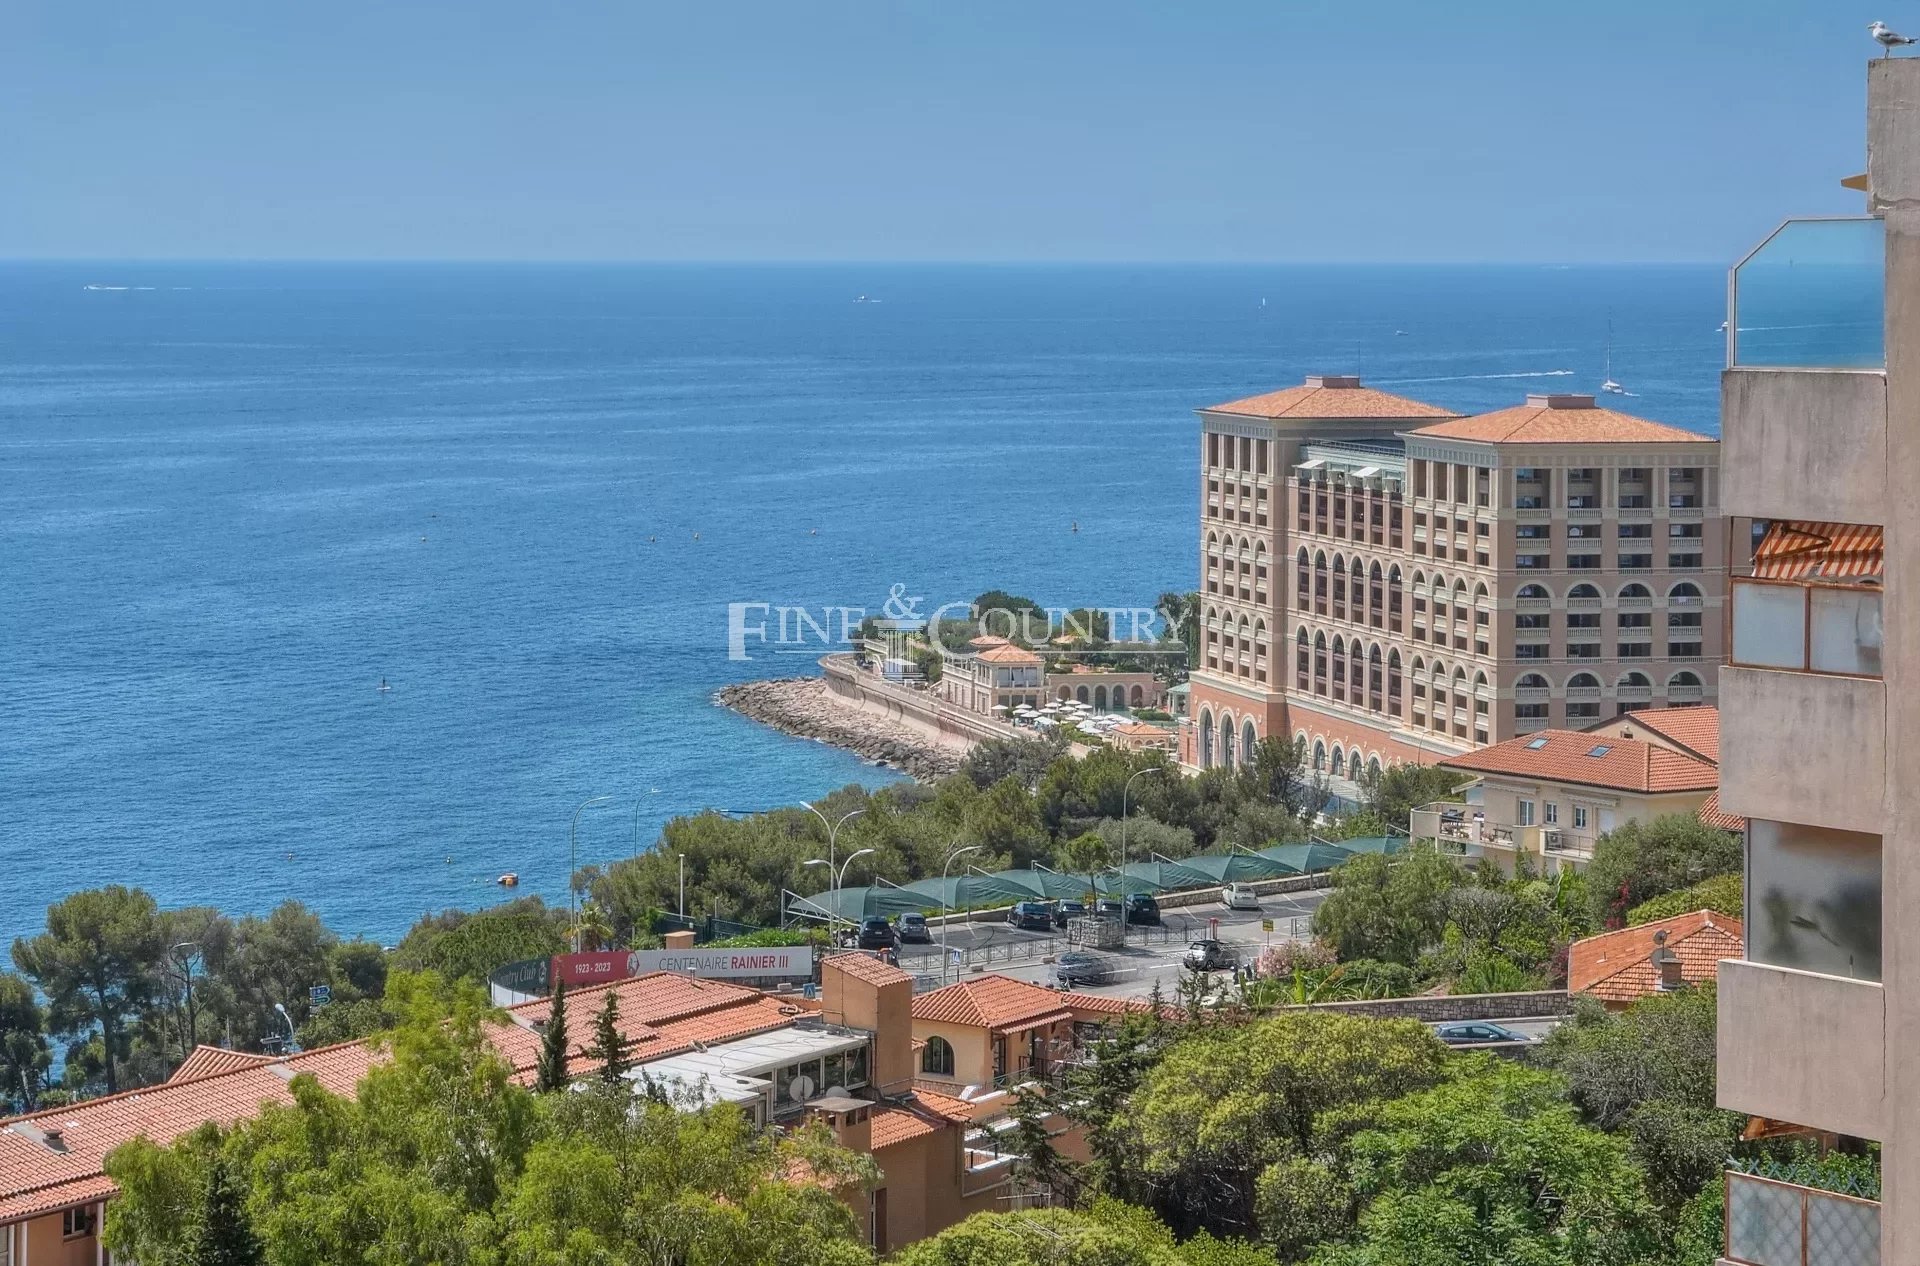 Photo of Penthouse-Villa for sale on the edge of Monaco, with sea Views